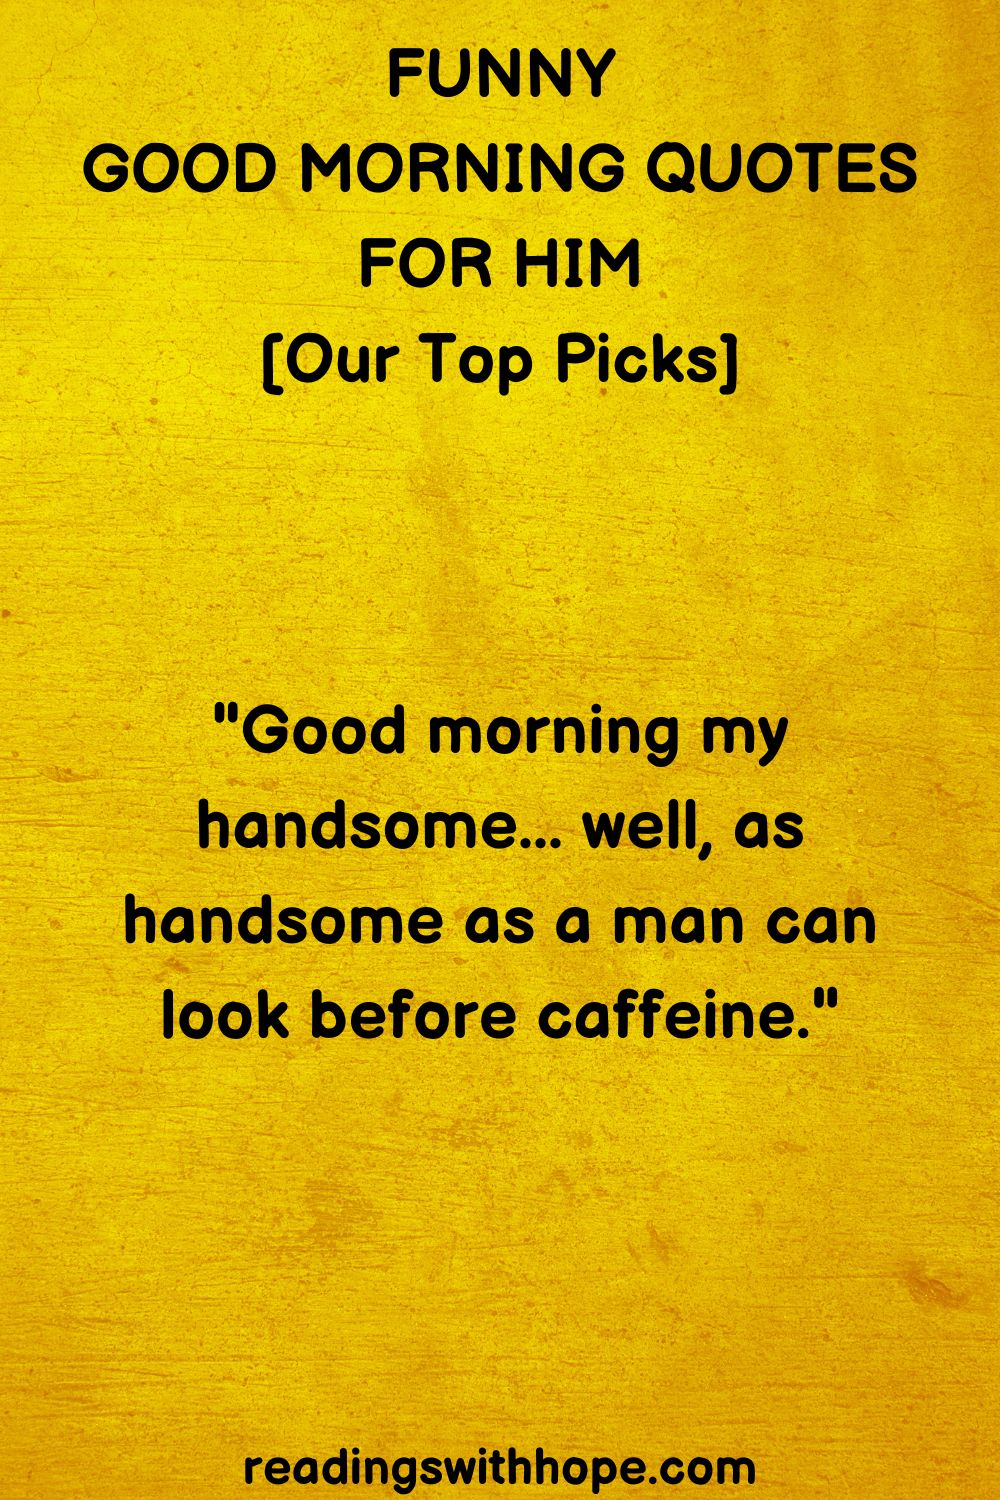 Funny Good Morning Quote for Him